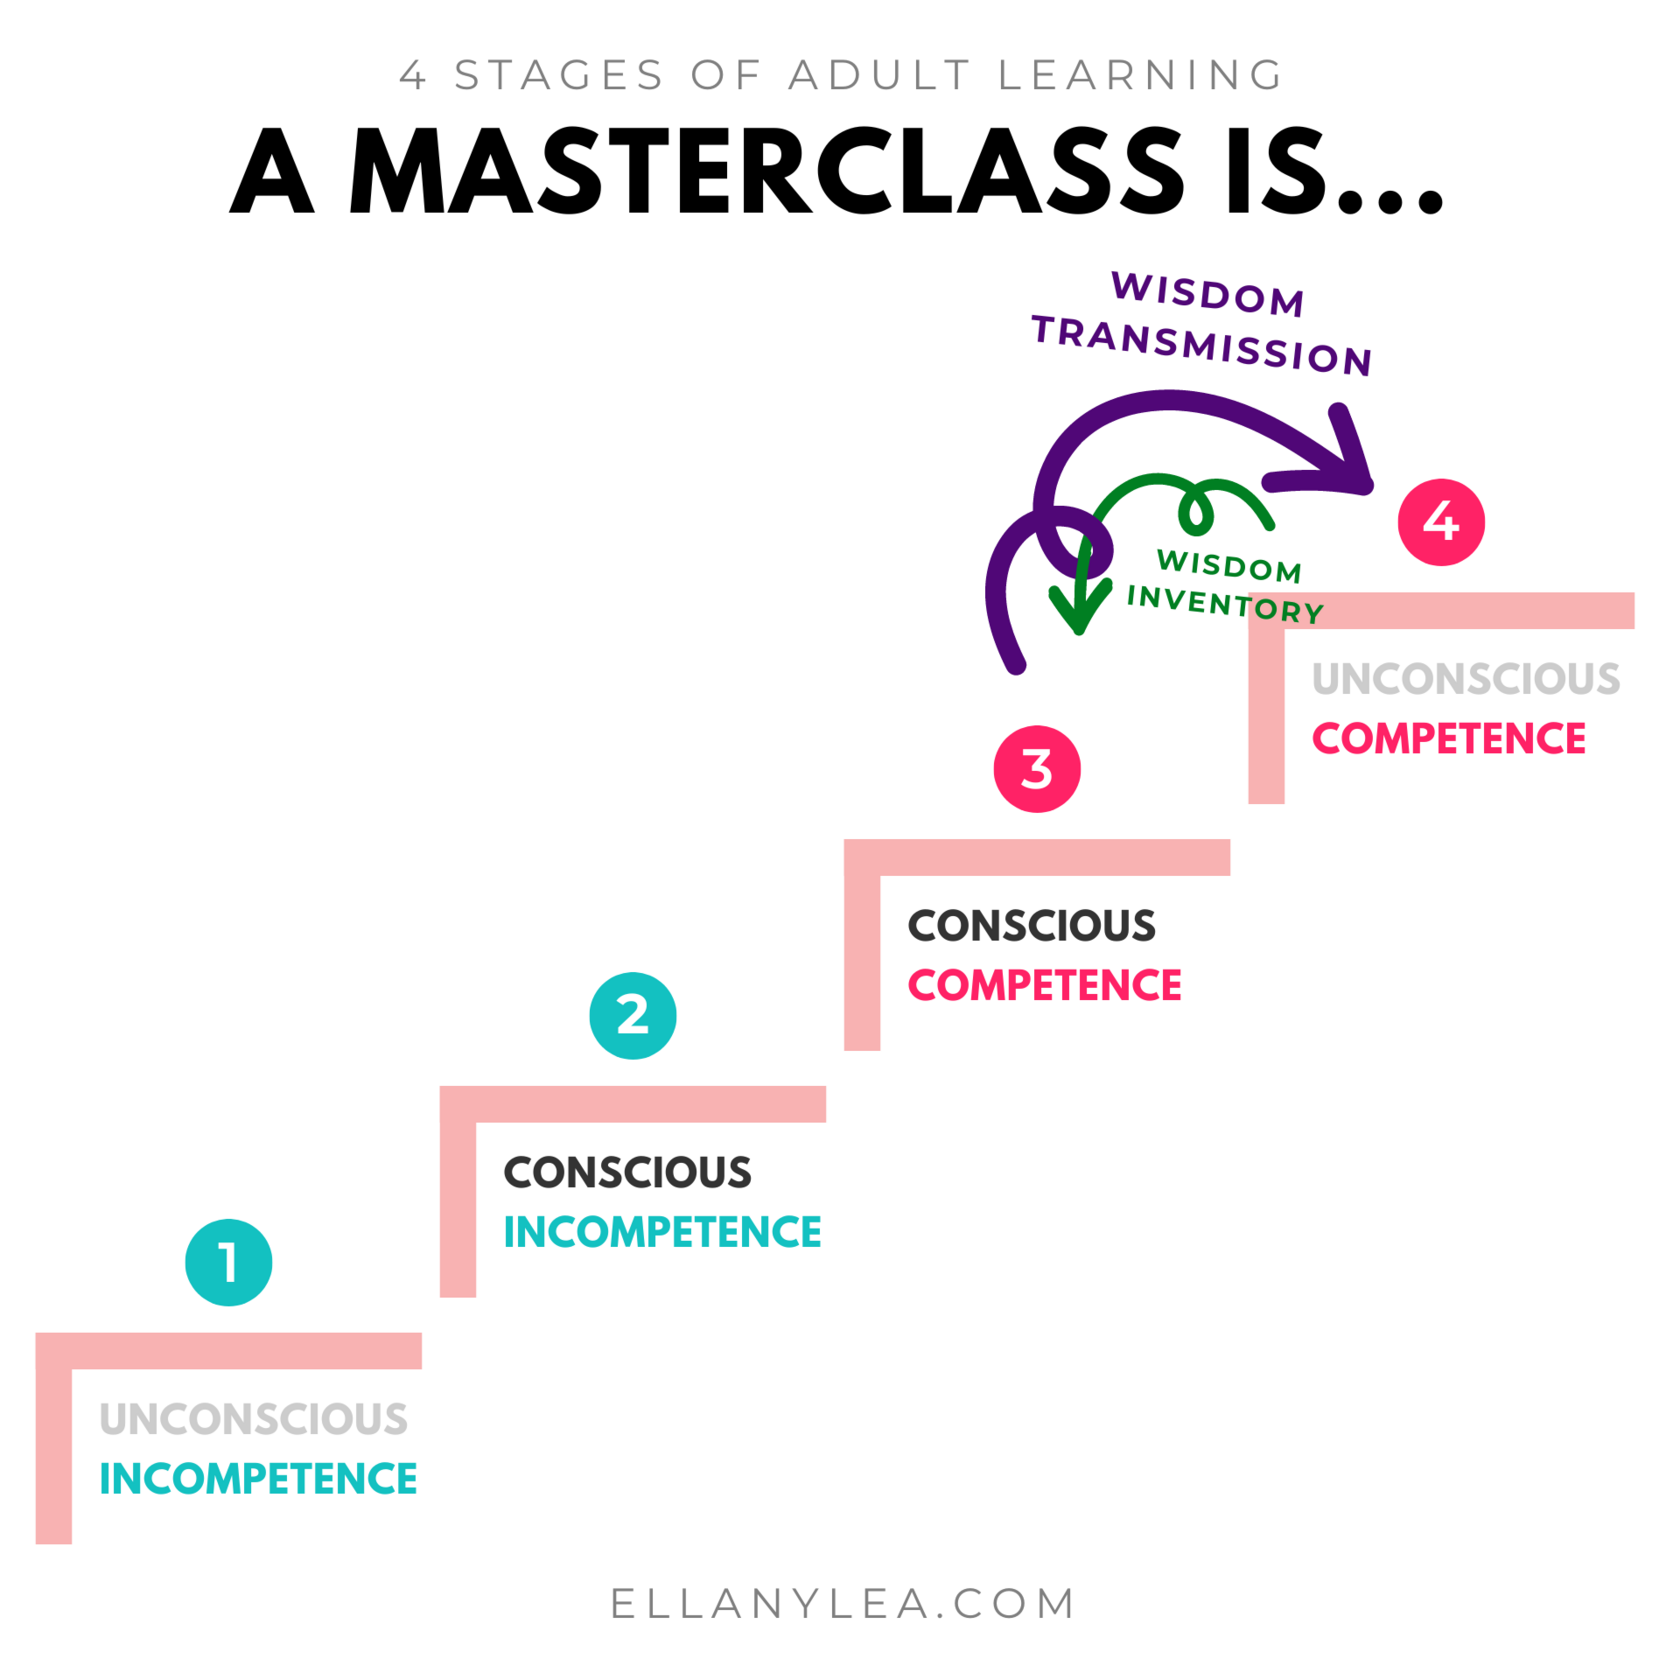 4-Stages-Adult-Learning-Definition-Masterclass